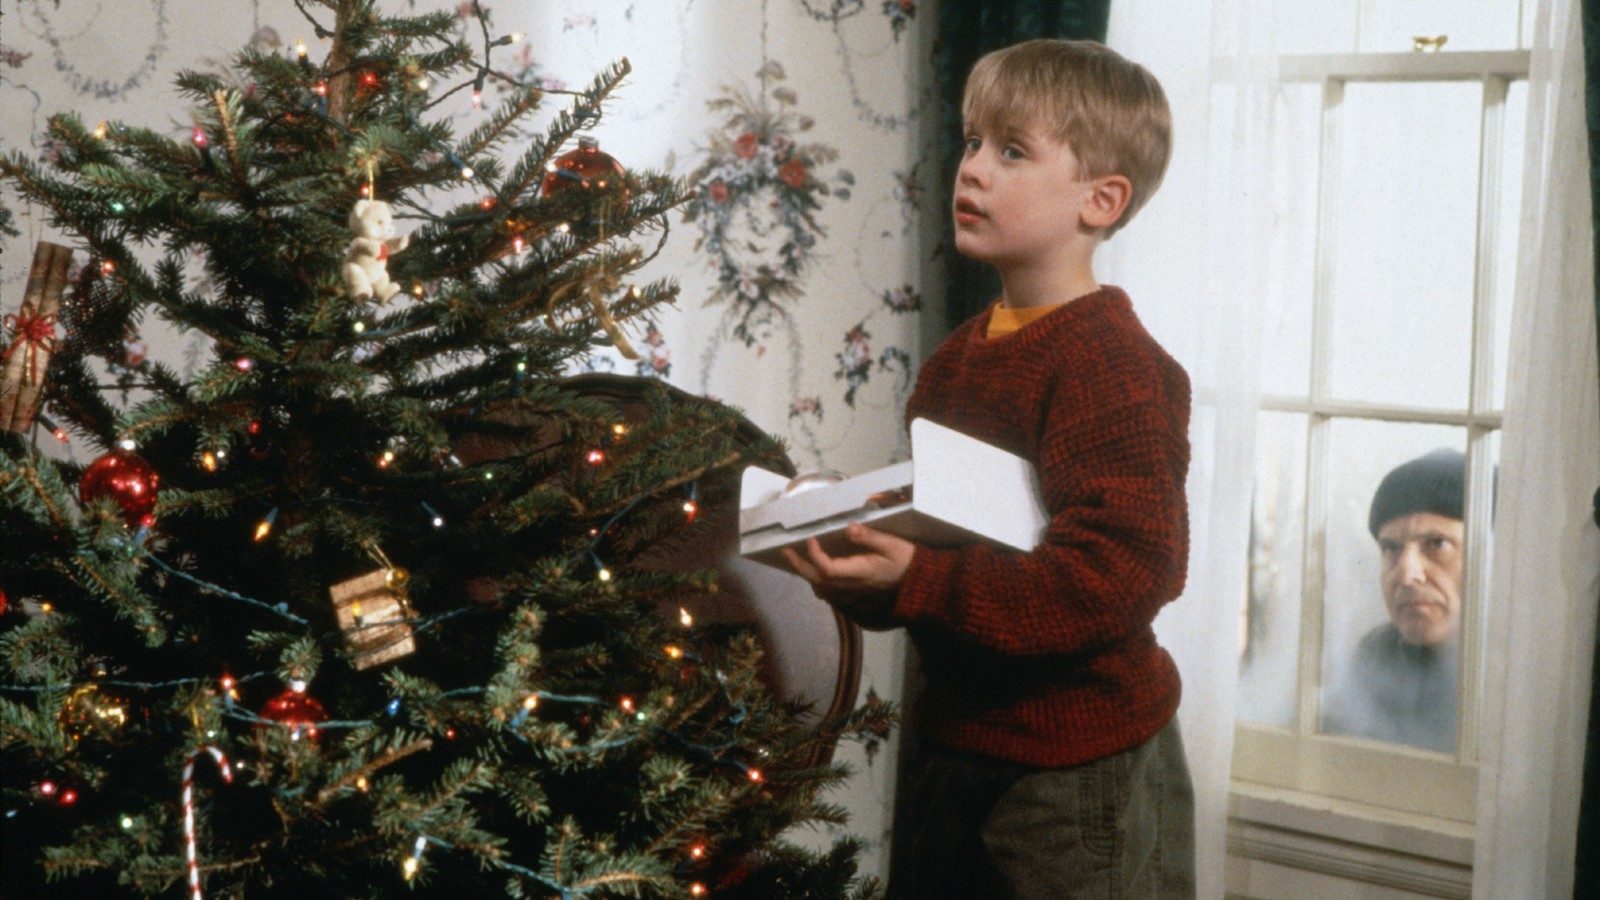 Virtual Holiday Film Series: Home Alone, Office of International Affairs